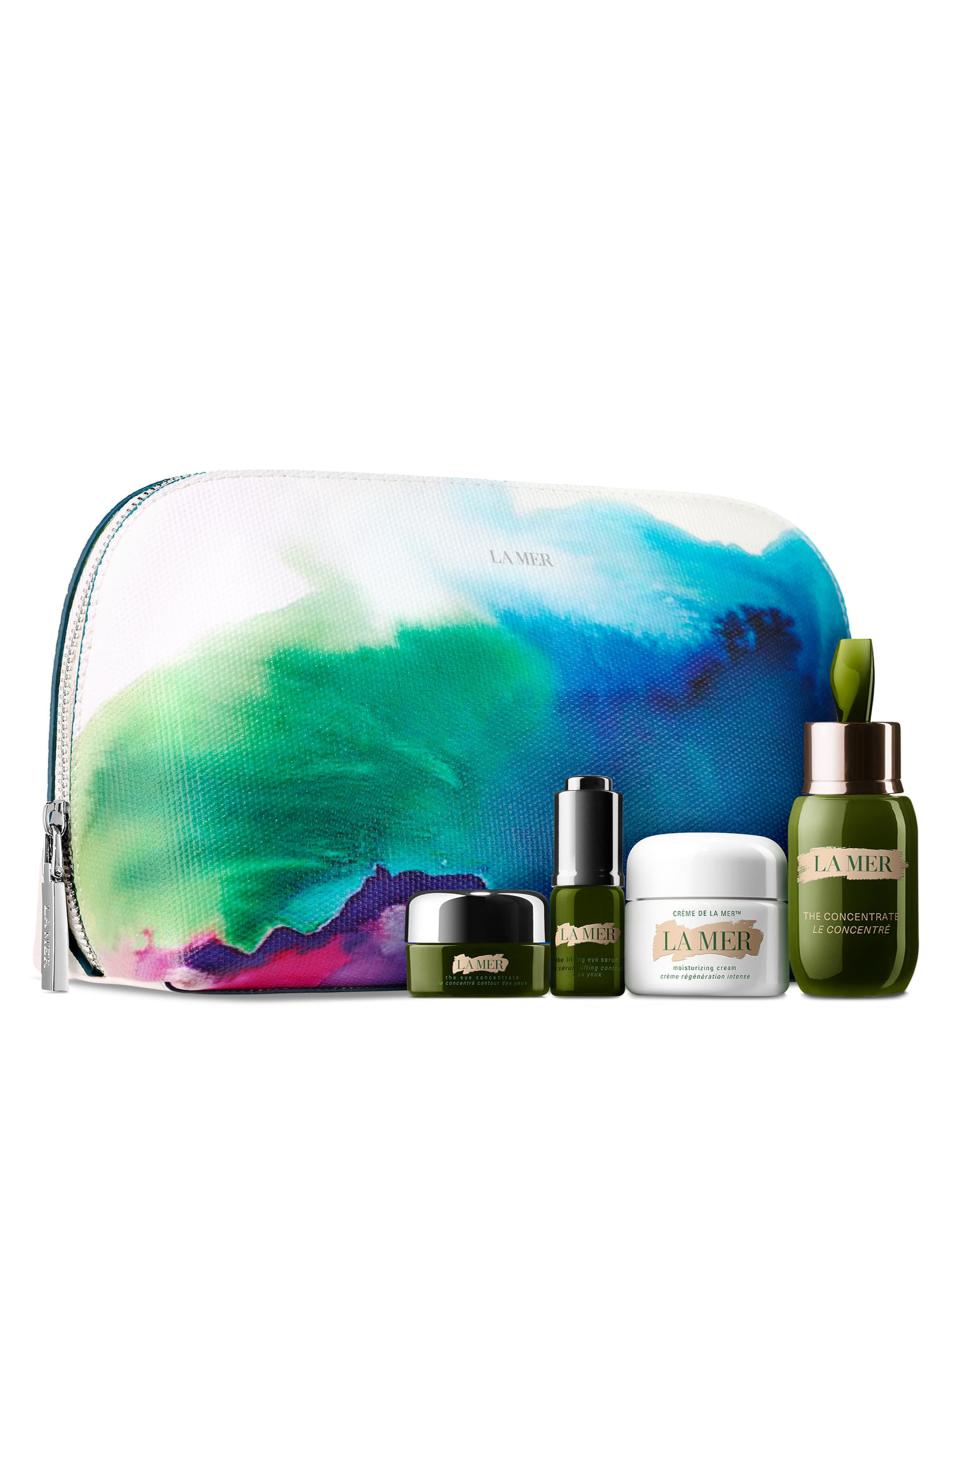 8) La Mer The Soothing Collection